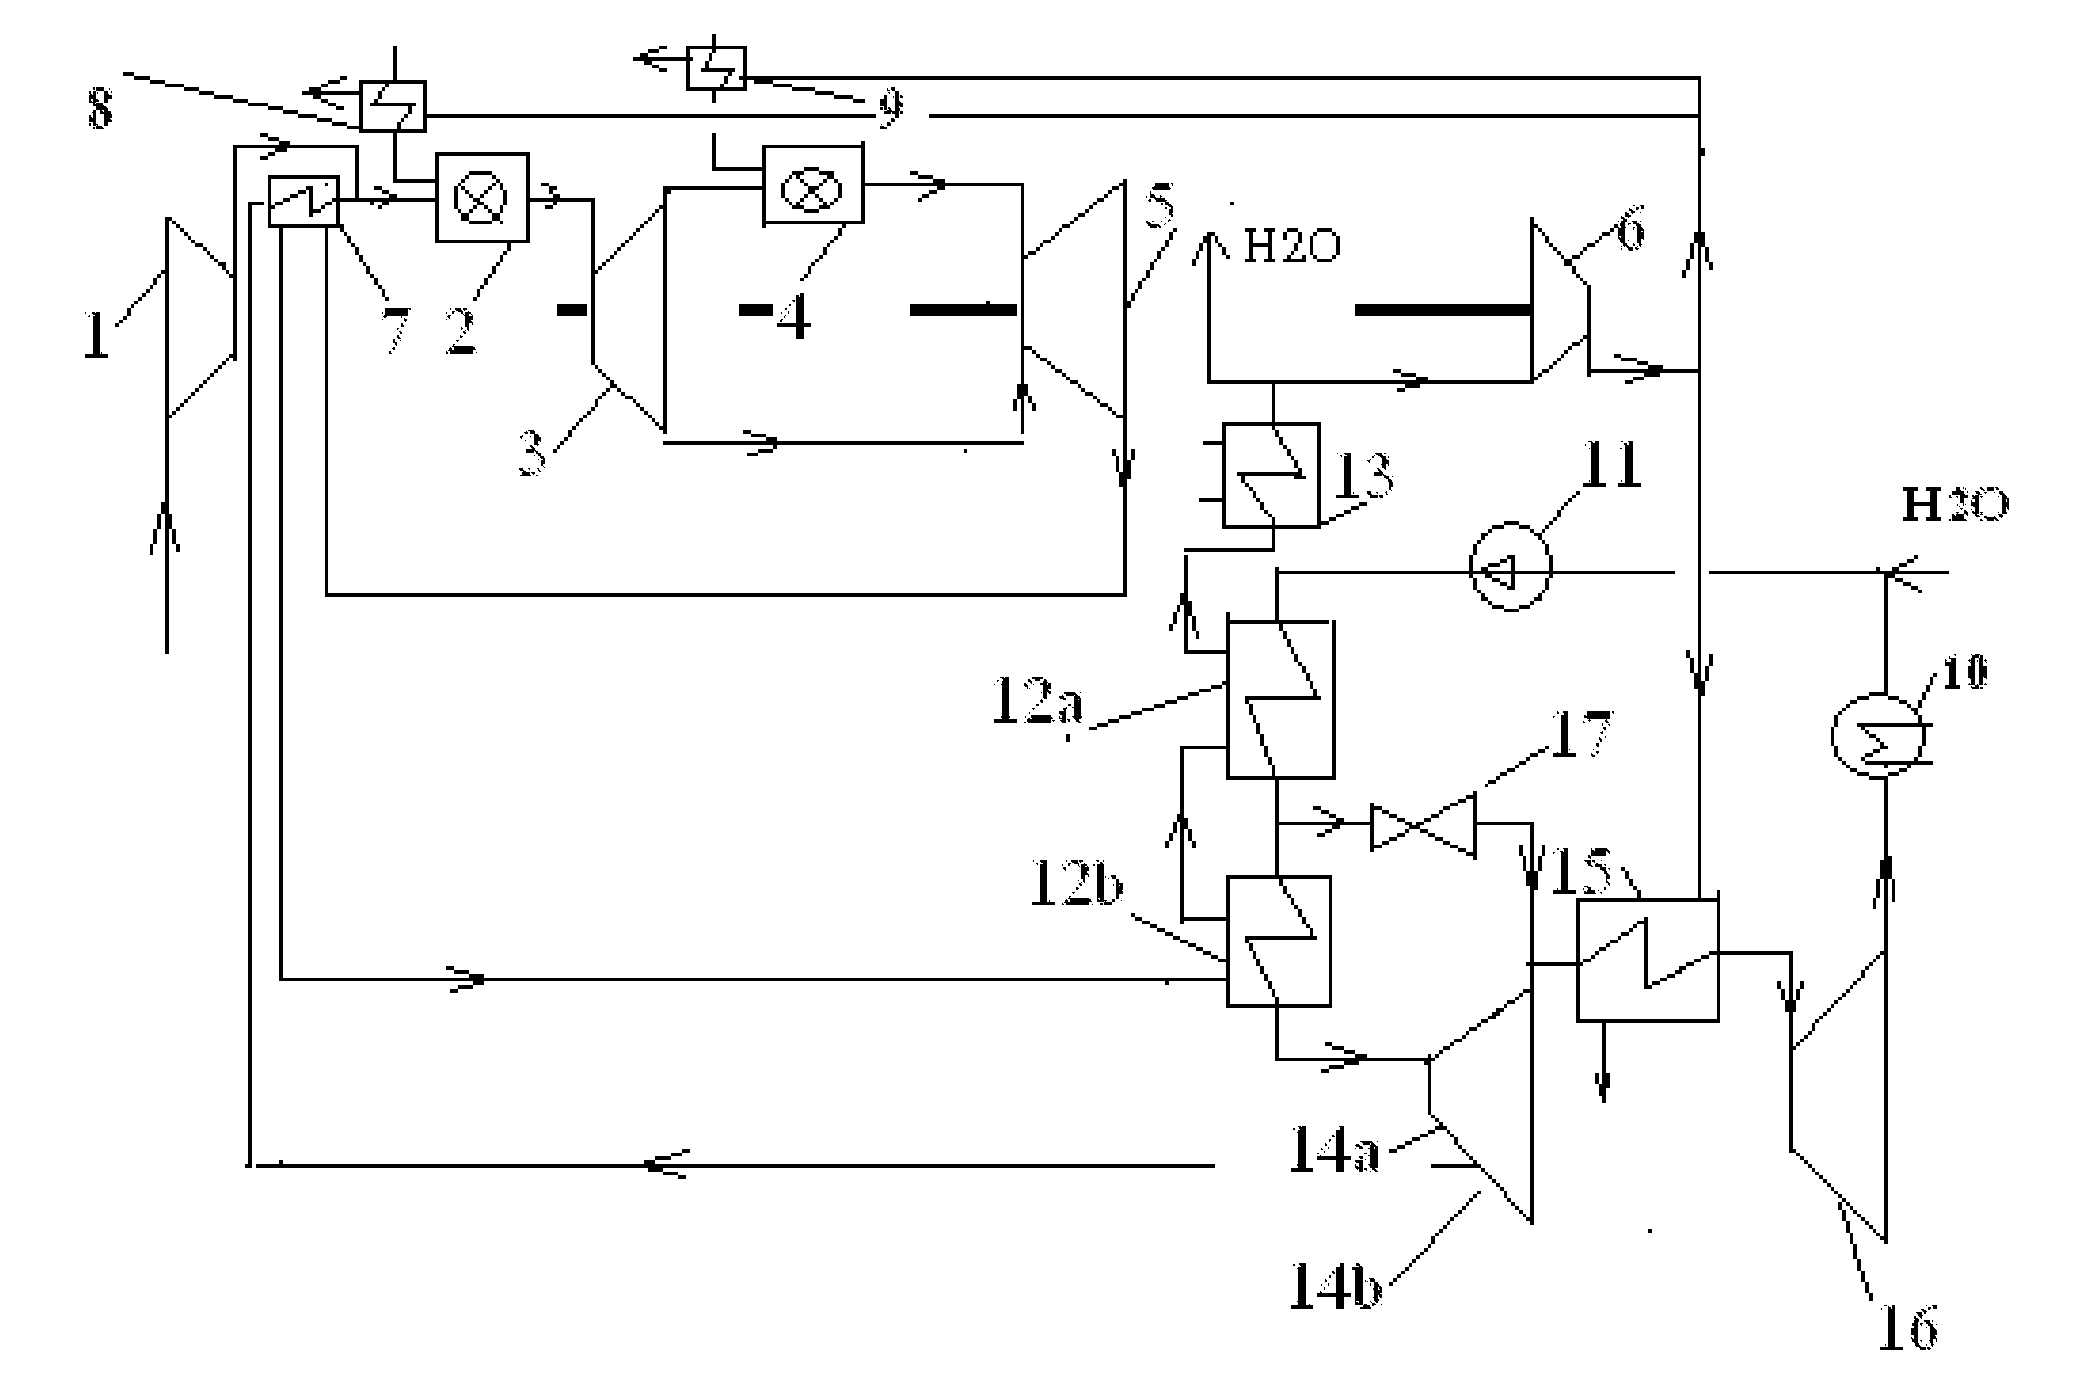 Method and apparatus for achieving a high efficiency in an open gas-turbine (combi) process